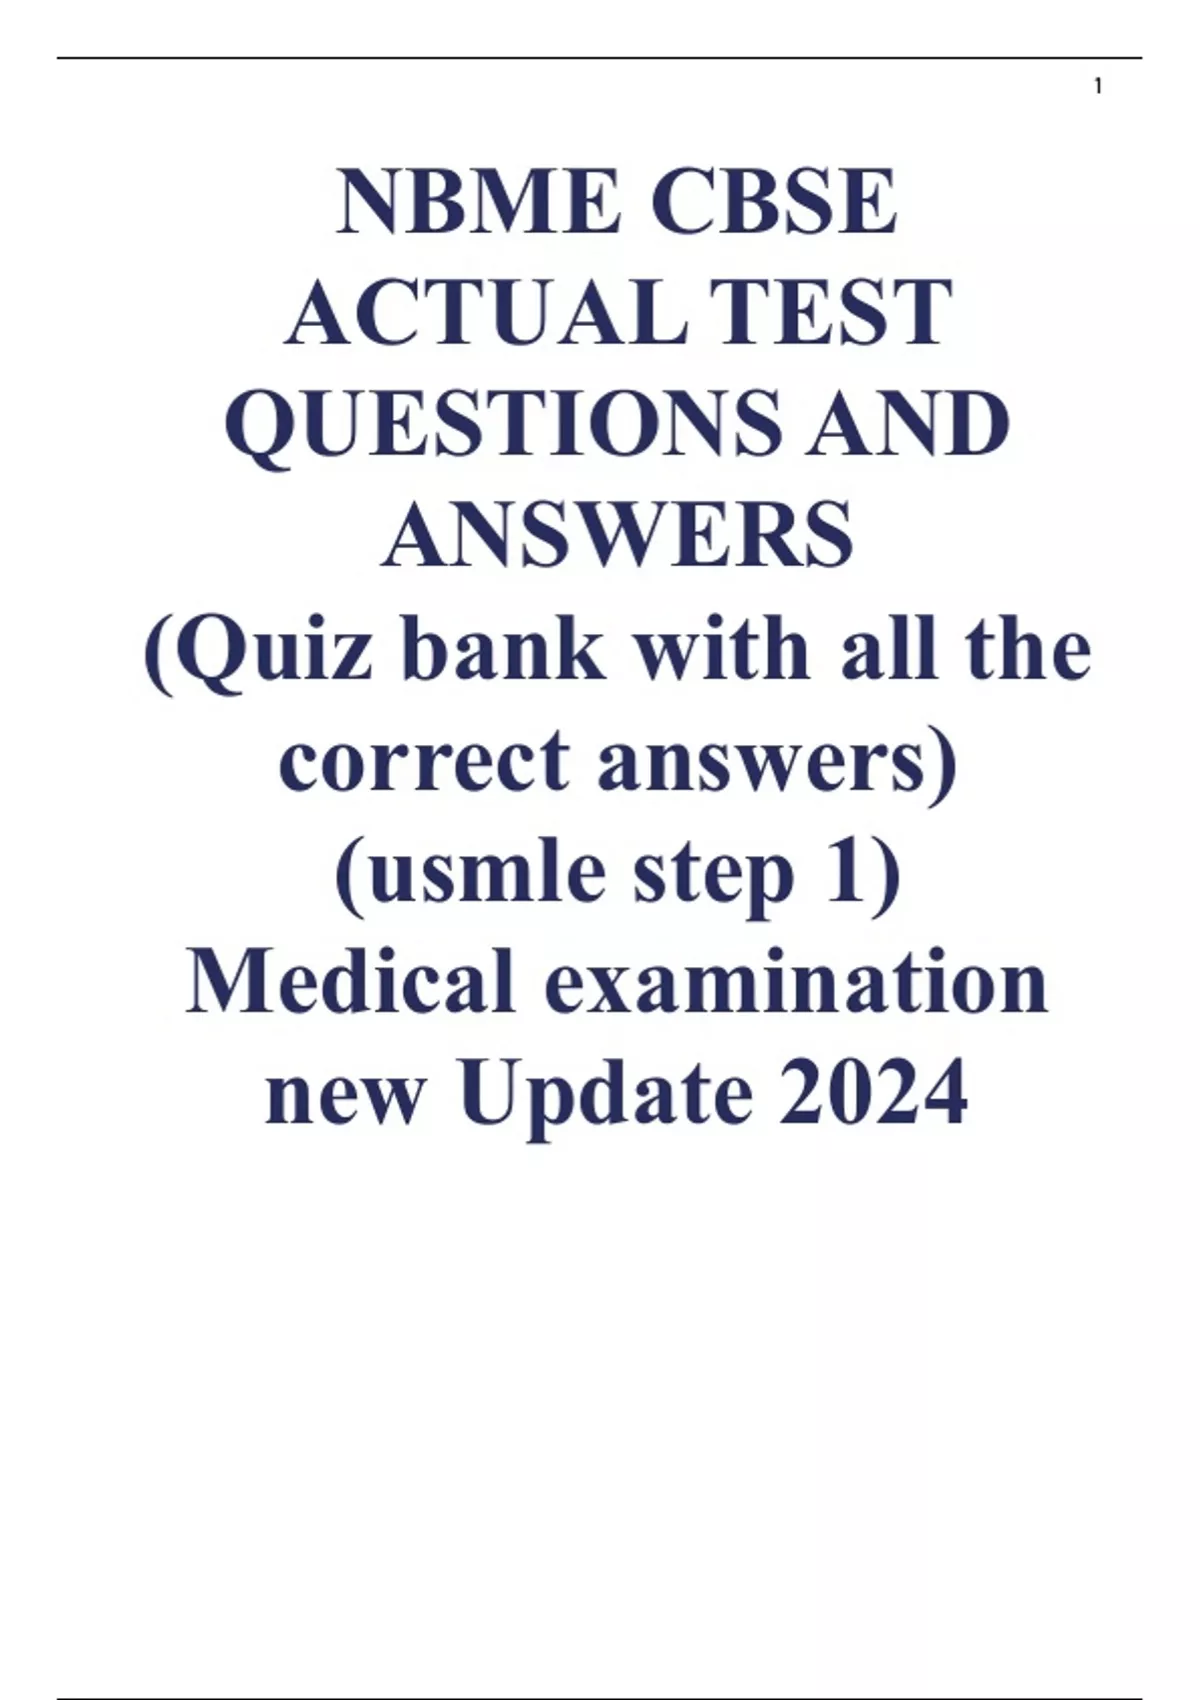 NBME CBSE ACTUAL TEST QUESTIONS AND ANSWERS (Quiz bank with all the